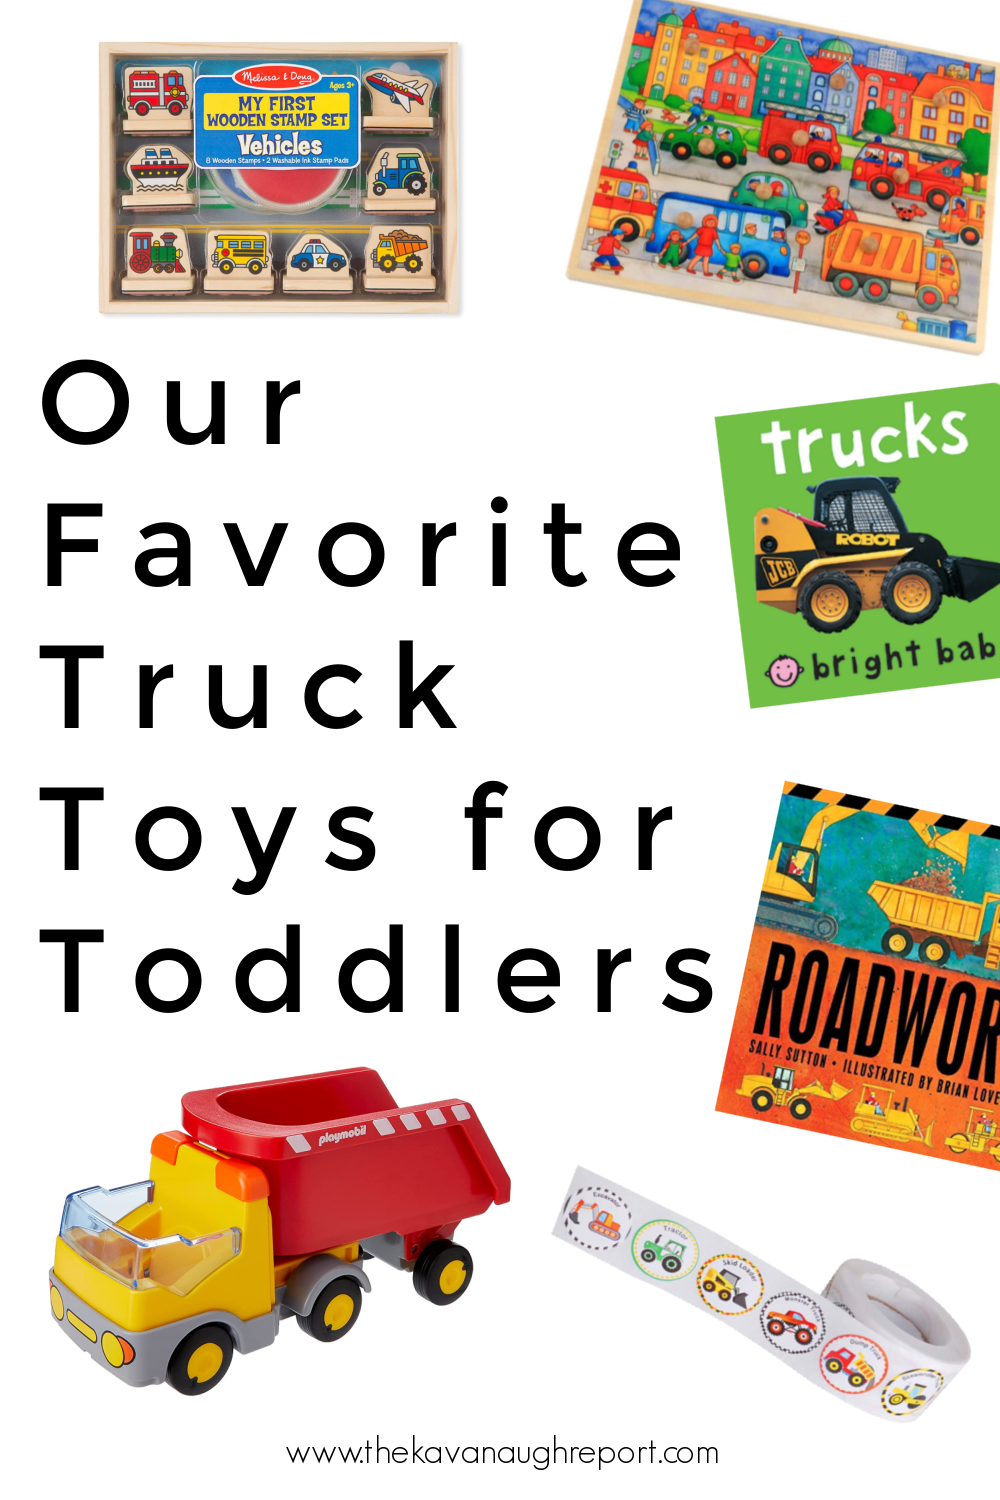 Here are some of our favorite truck toys for toddlers that we use in our Montessori home. Our Montessori toddler uses these toys and books daily.